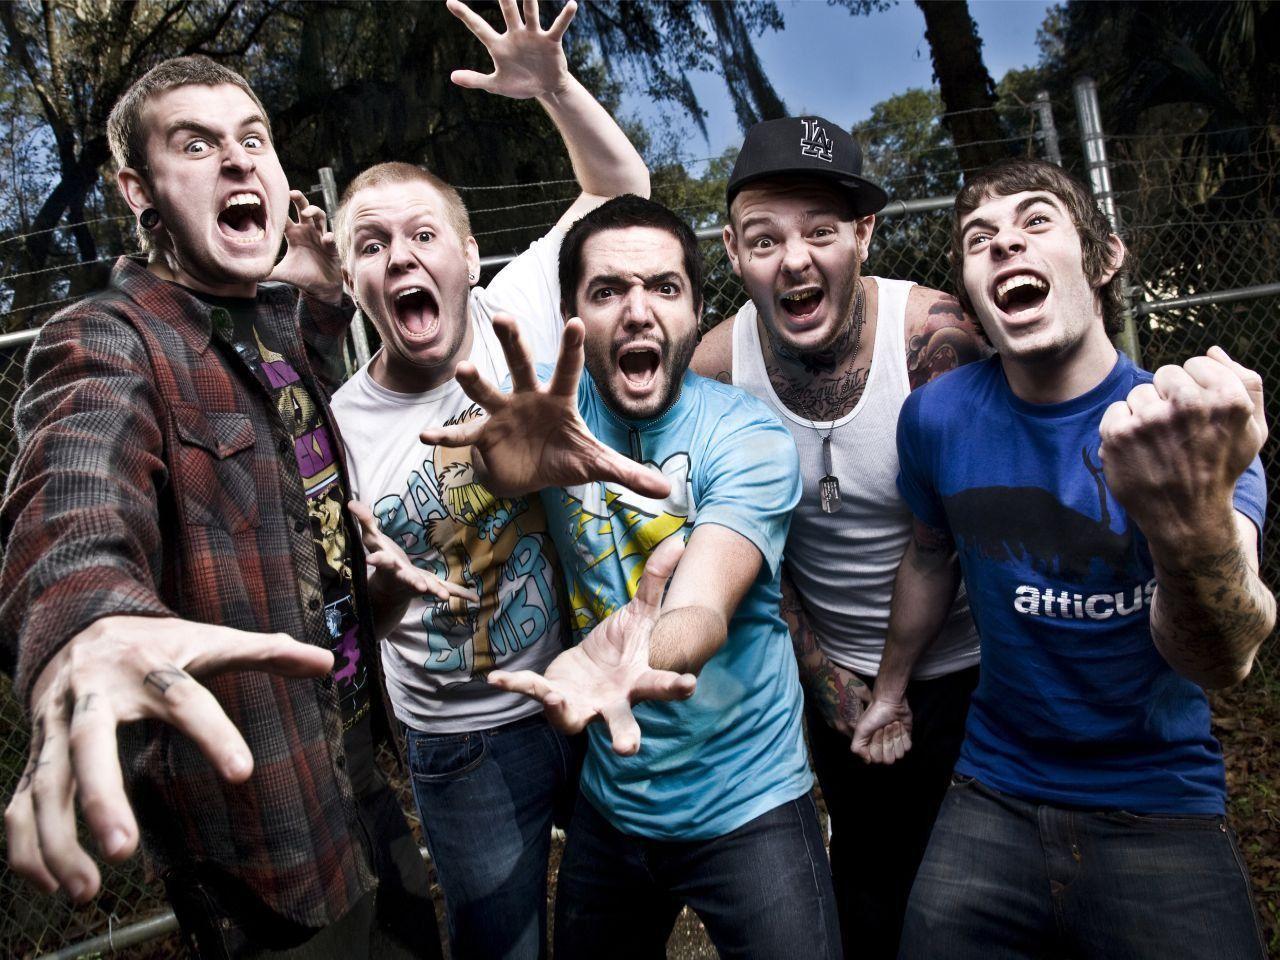 A Day to Remember&;s “Common Courtesy” has fans melting into